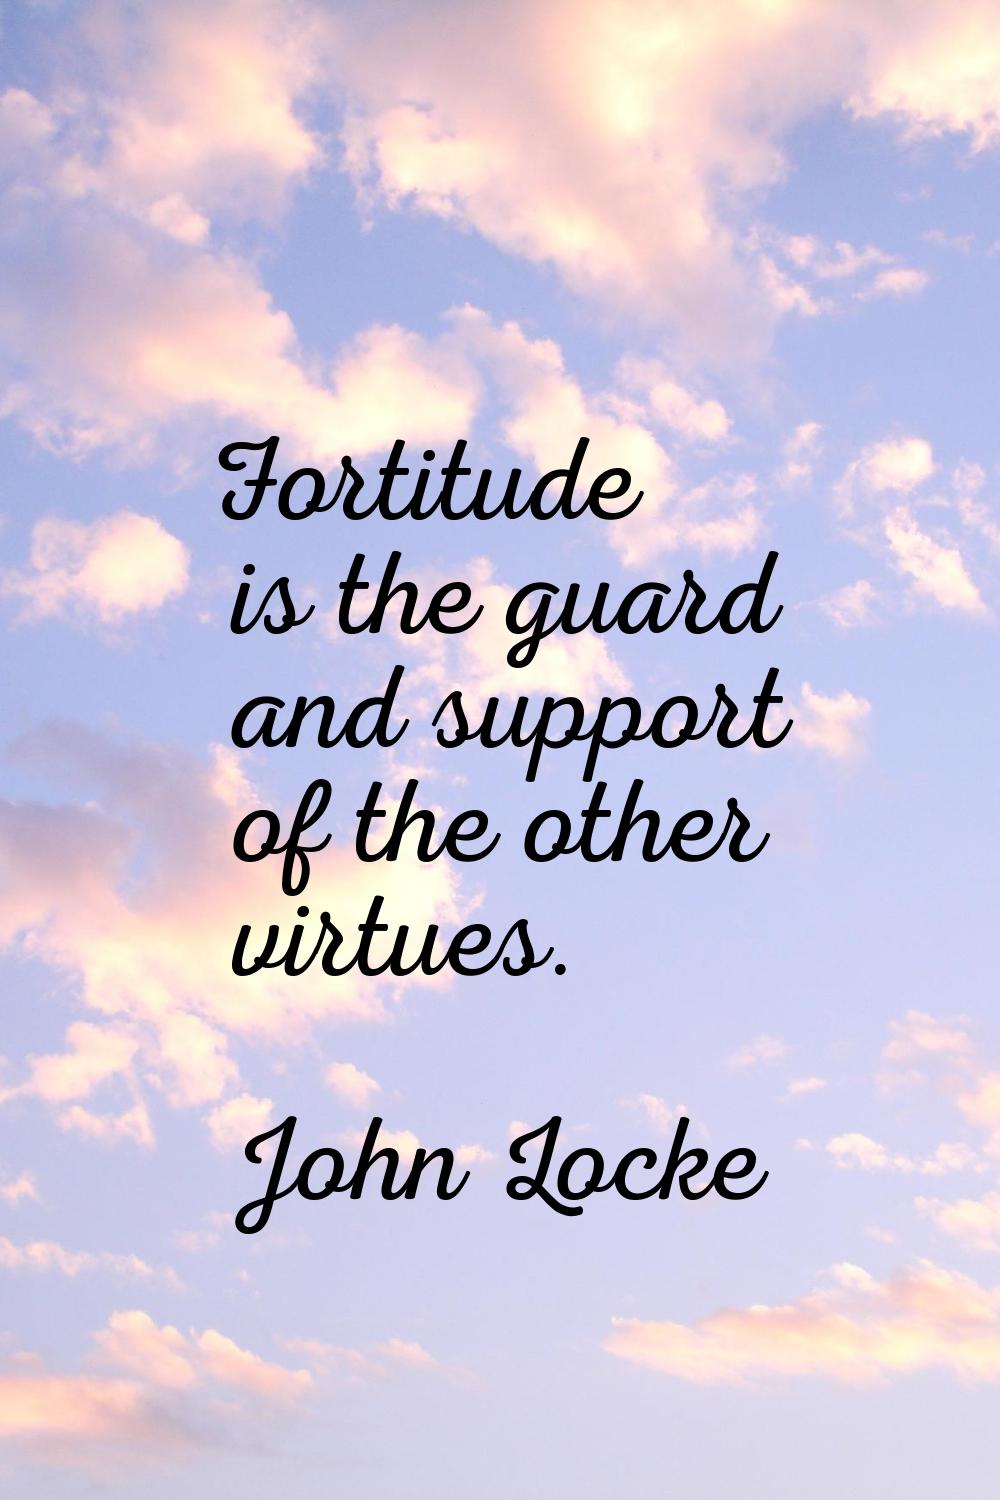 Fortitude is the guard and support of the other virtues.